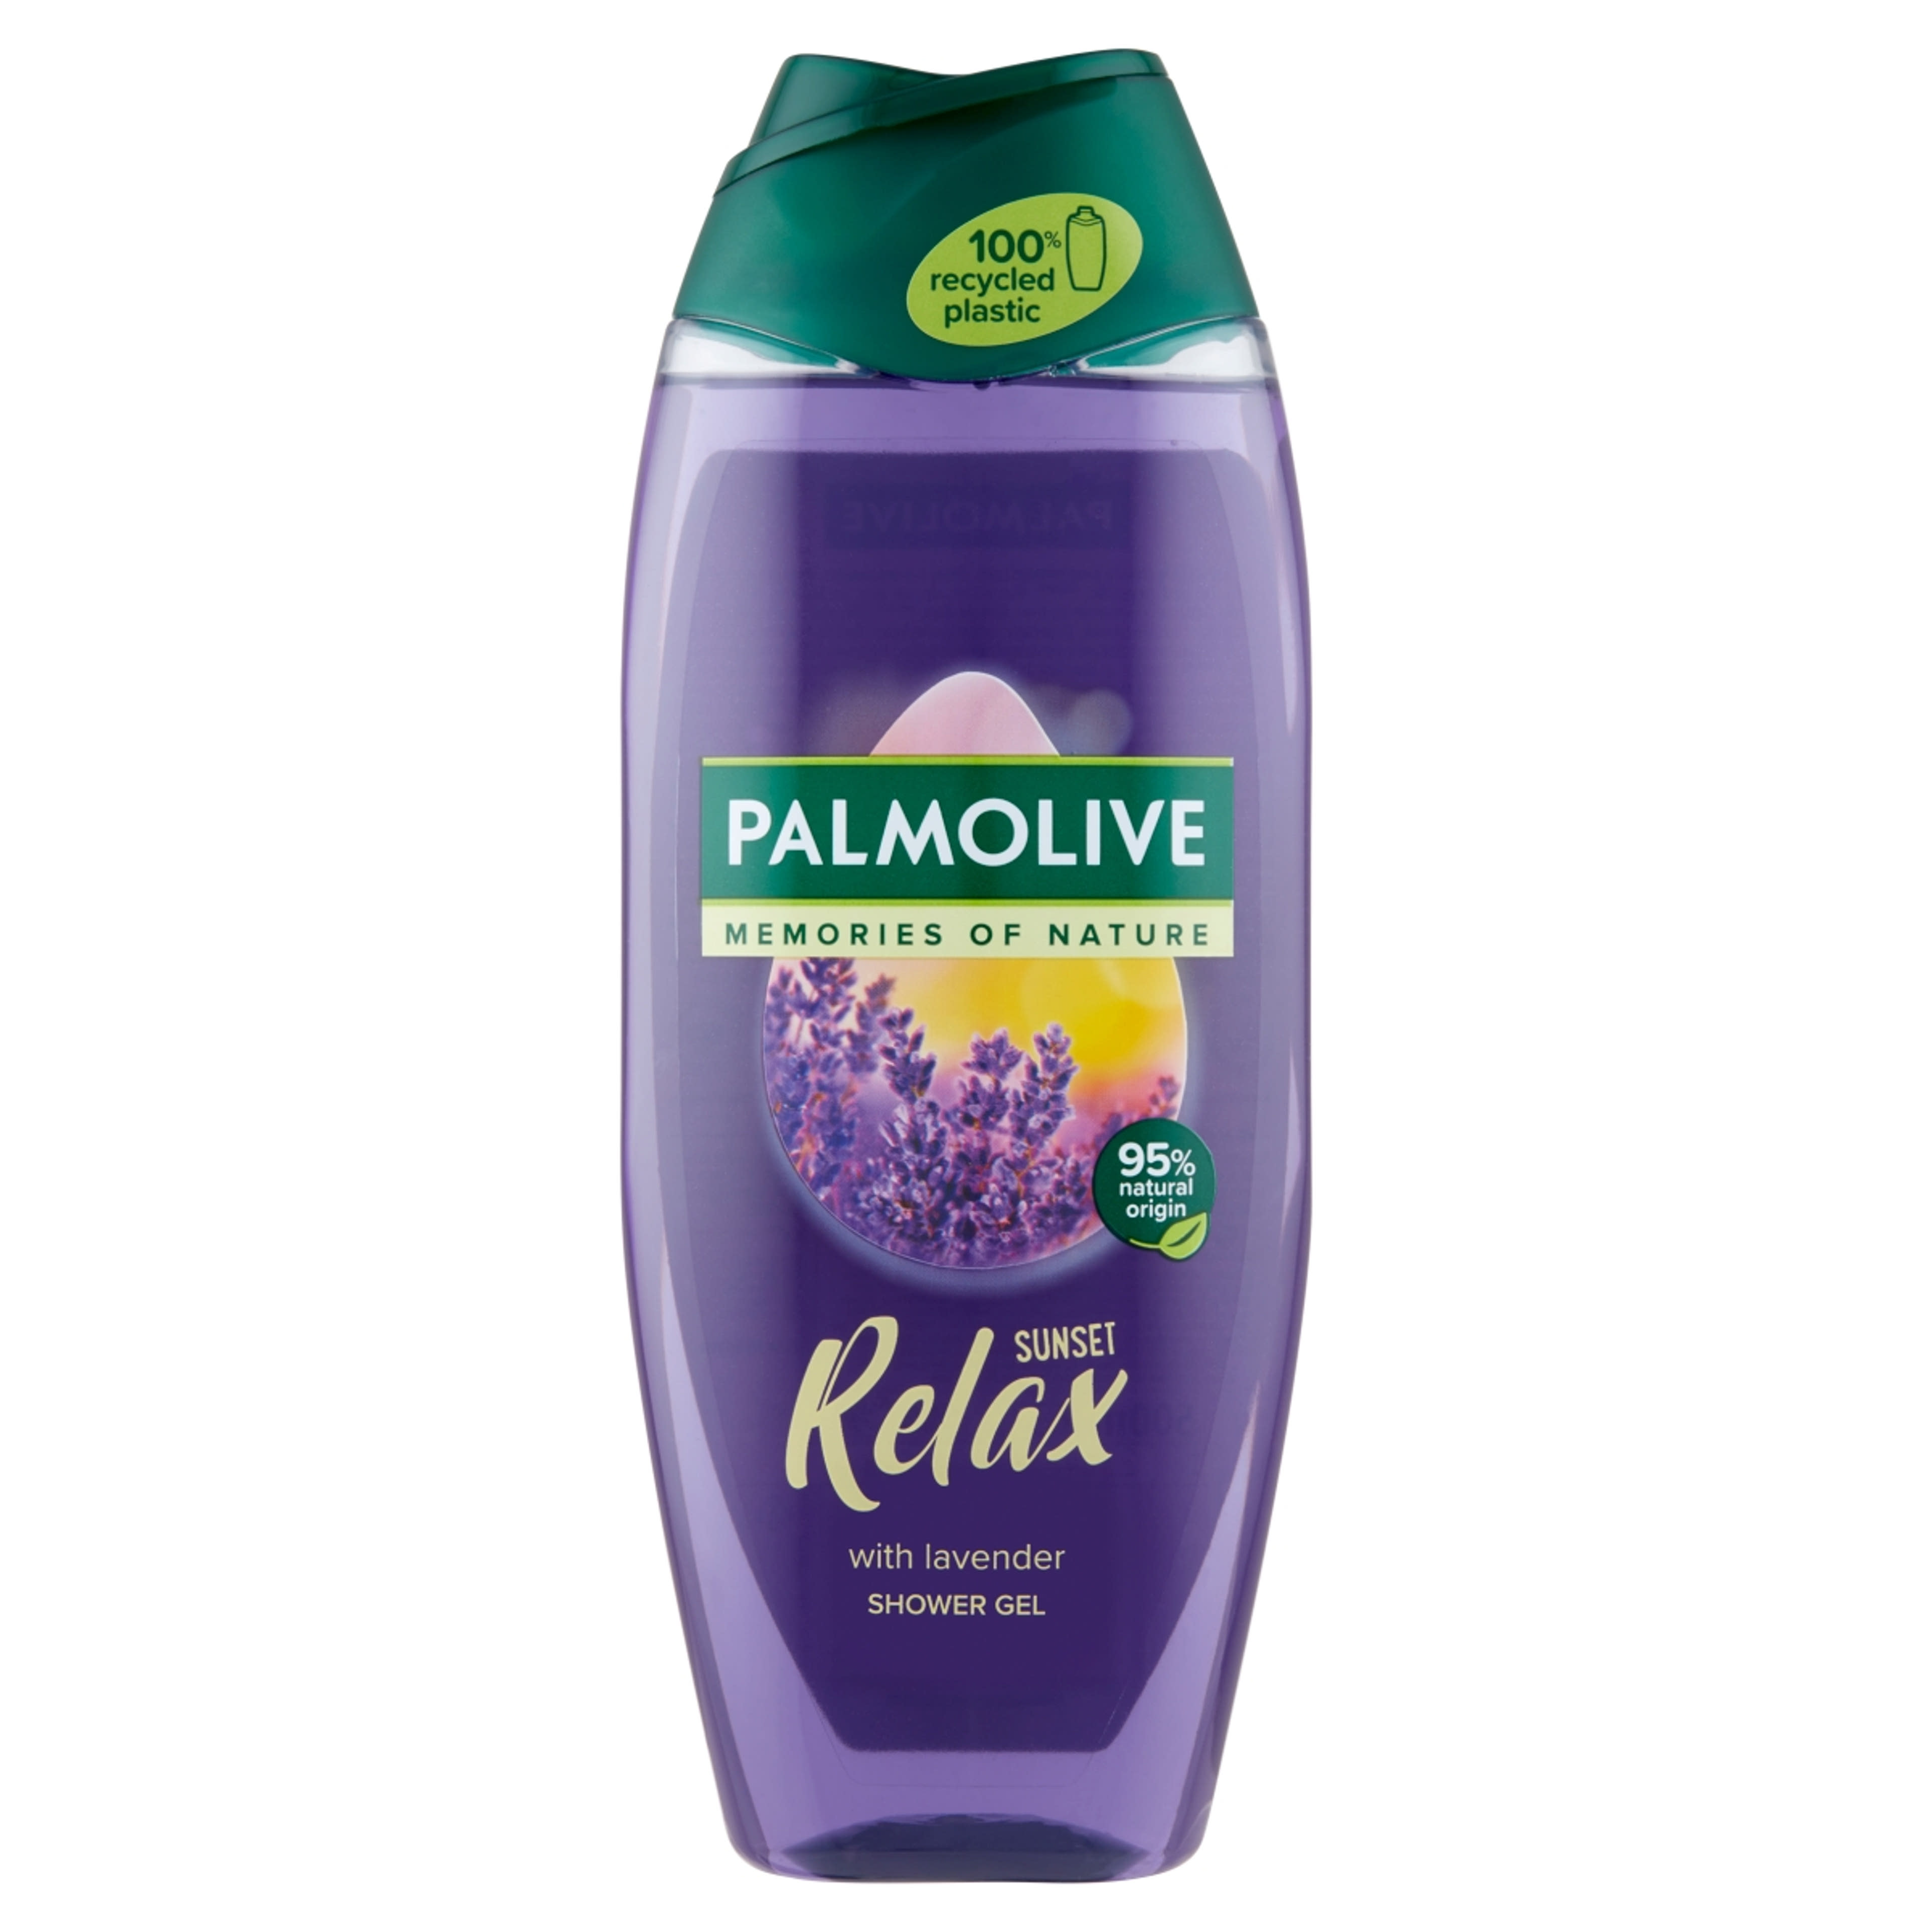 Palmolive Memories of Nature Sunset Relax tusfürdő - 500 ml